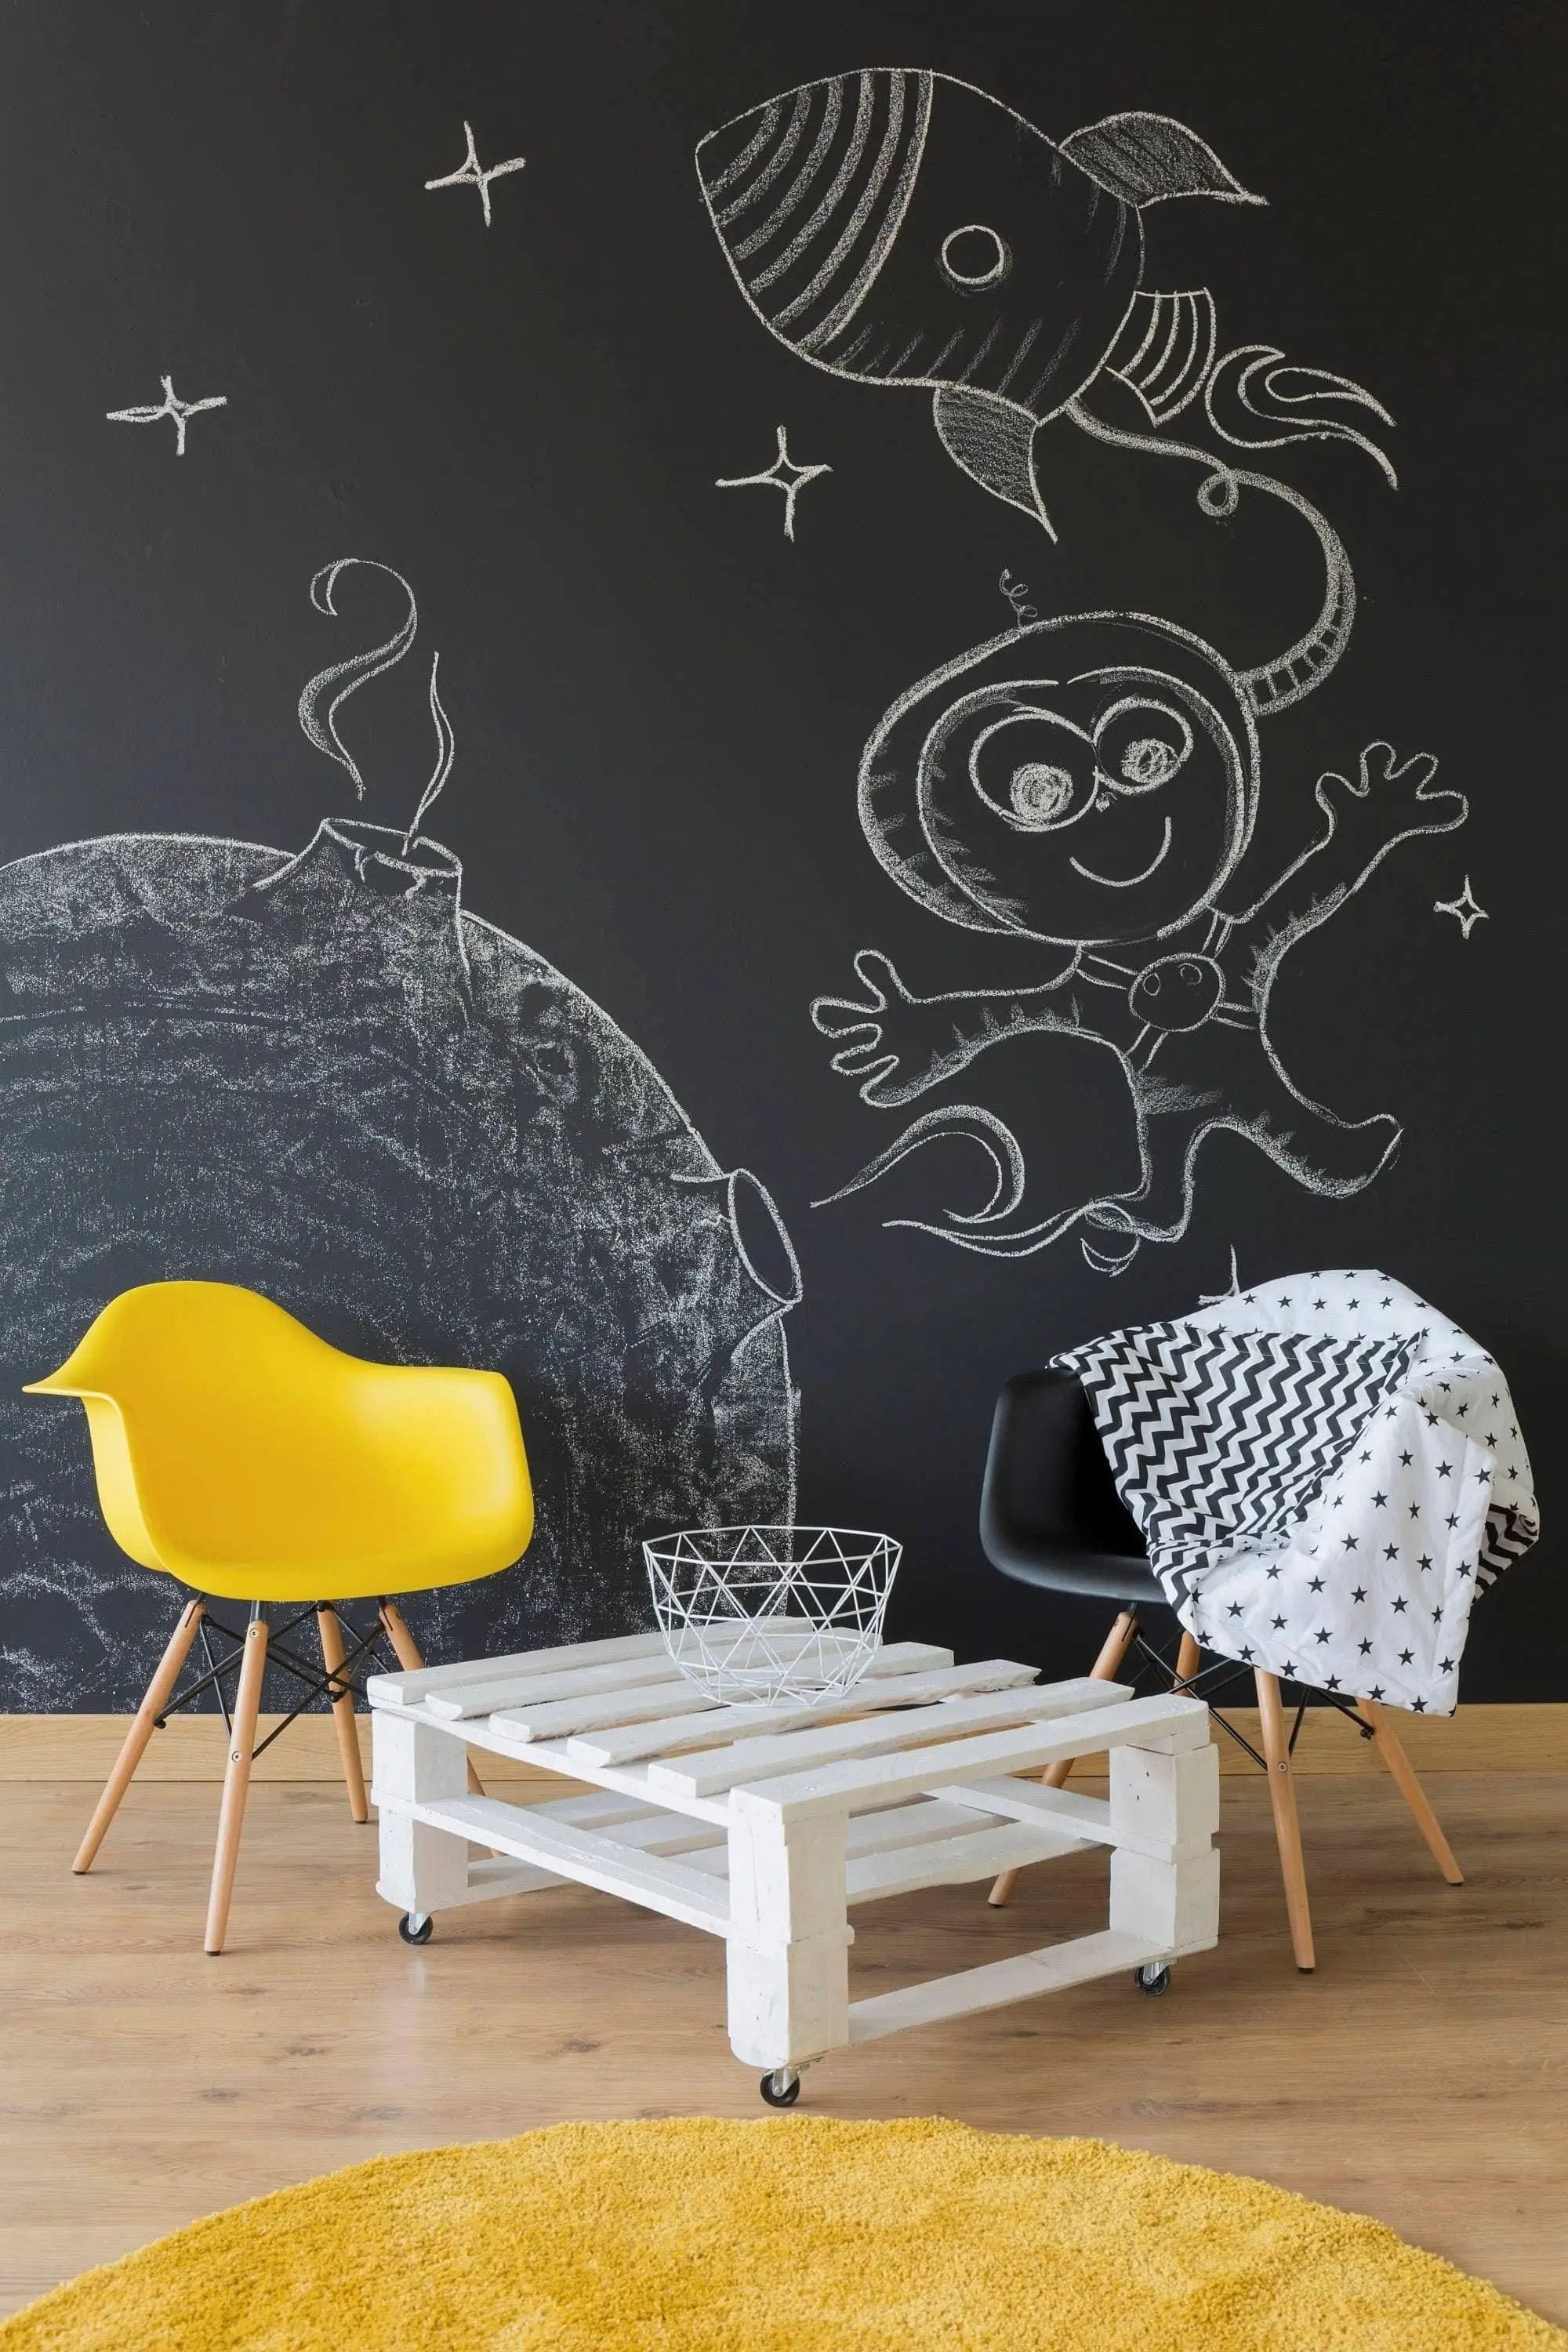 Chalkboard Wallpaper Stick and Peel for Home Room Kitchen Kids